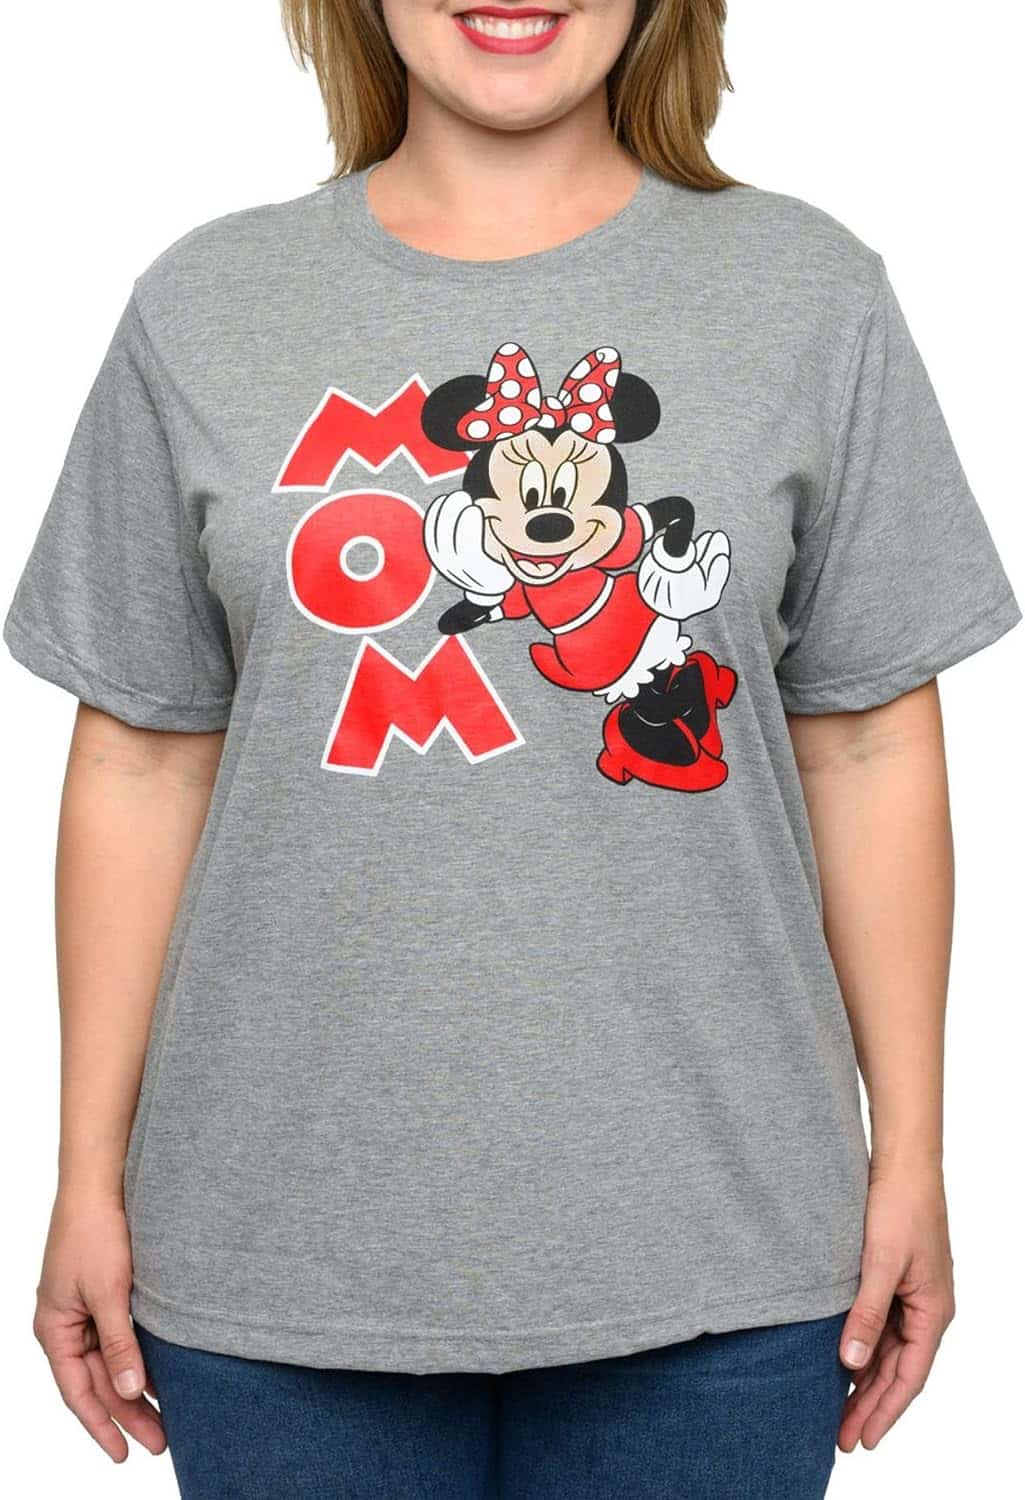 Disney Womens Plus Size T-Shirt Minnie Mouse Mickey Daisy Print - A Stylish and Fun Addition to Your Wardrobe